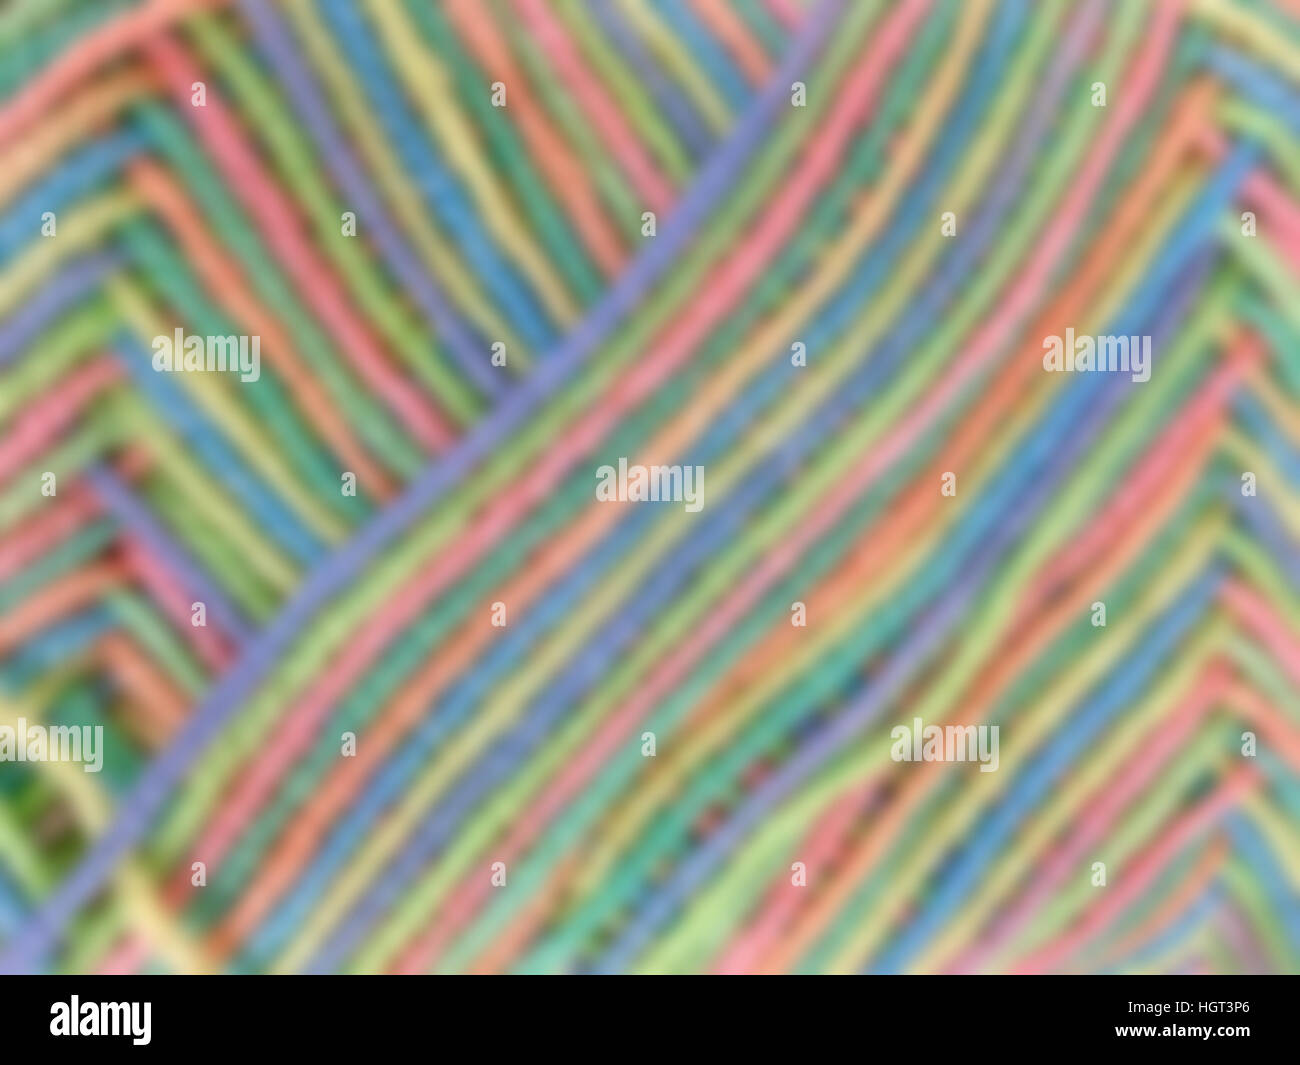 Wool Threads Mixed Together Stock Image - Image of crisscross